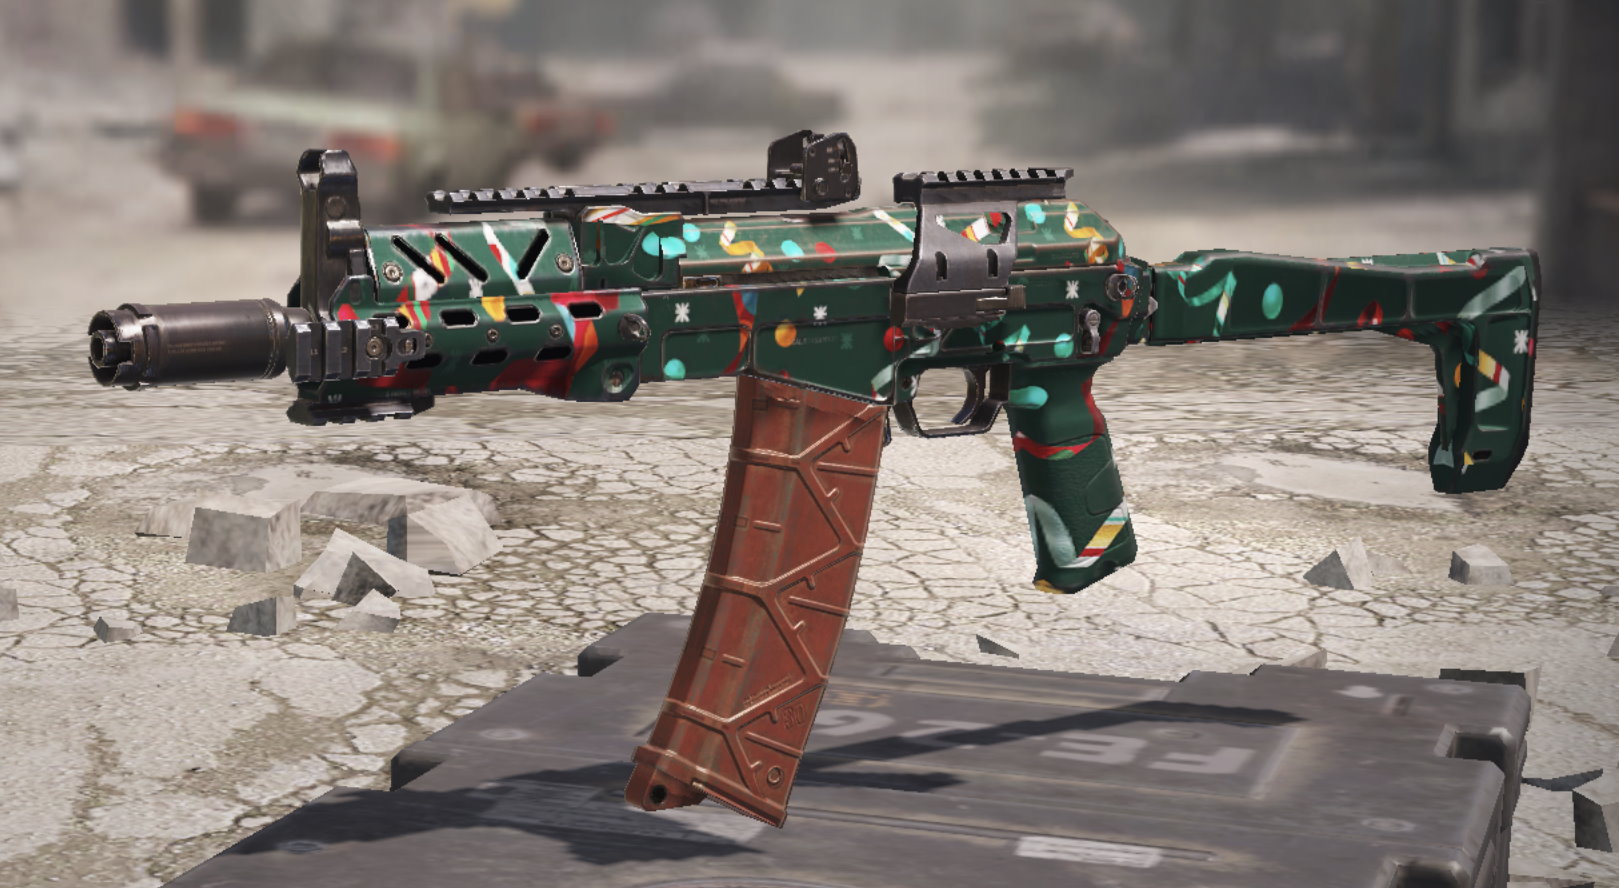 RUS-79U Holiday Ribbons, Uncommon camo in Call of Duty Mobile